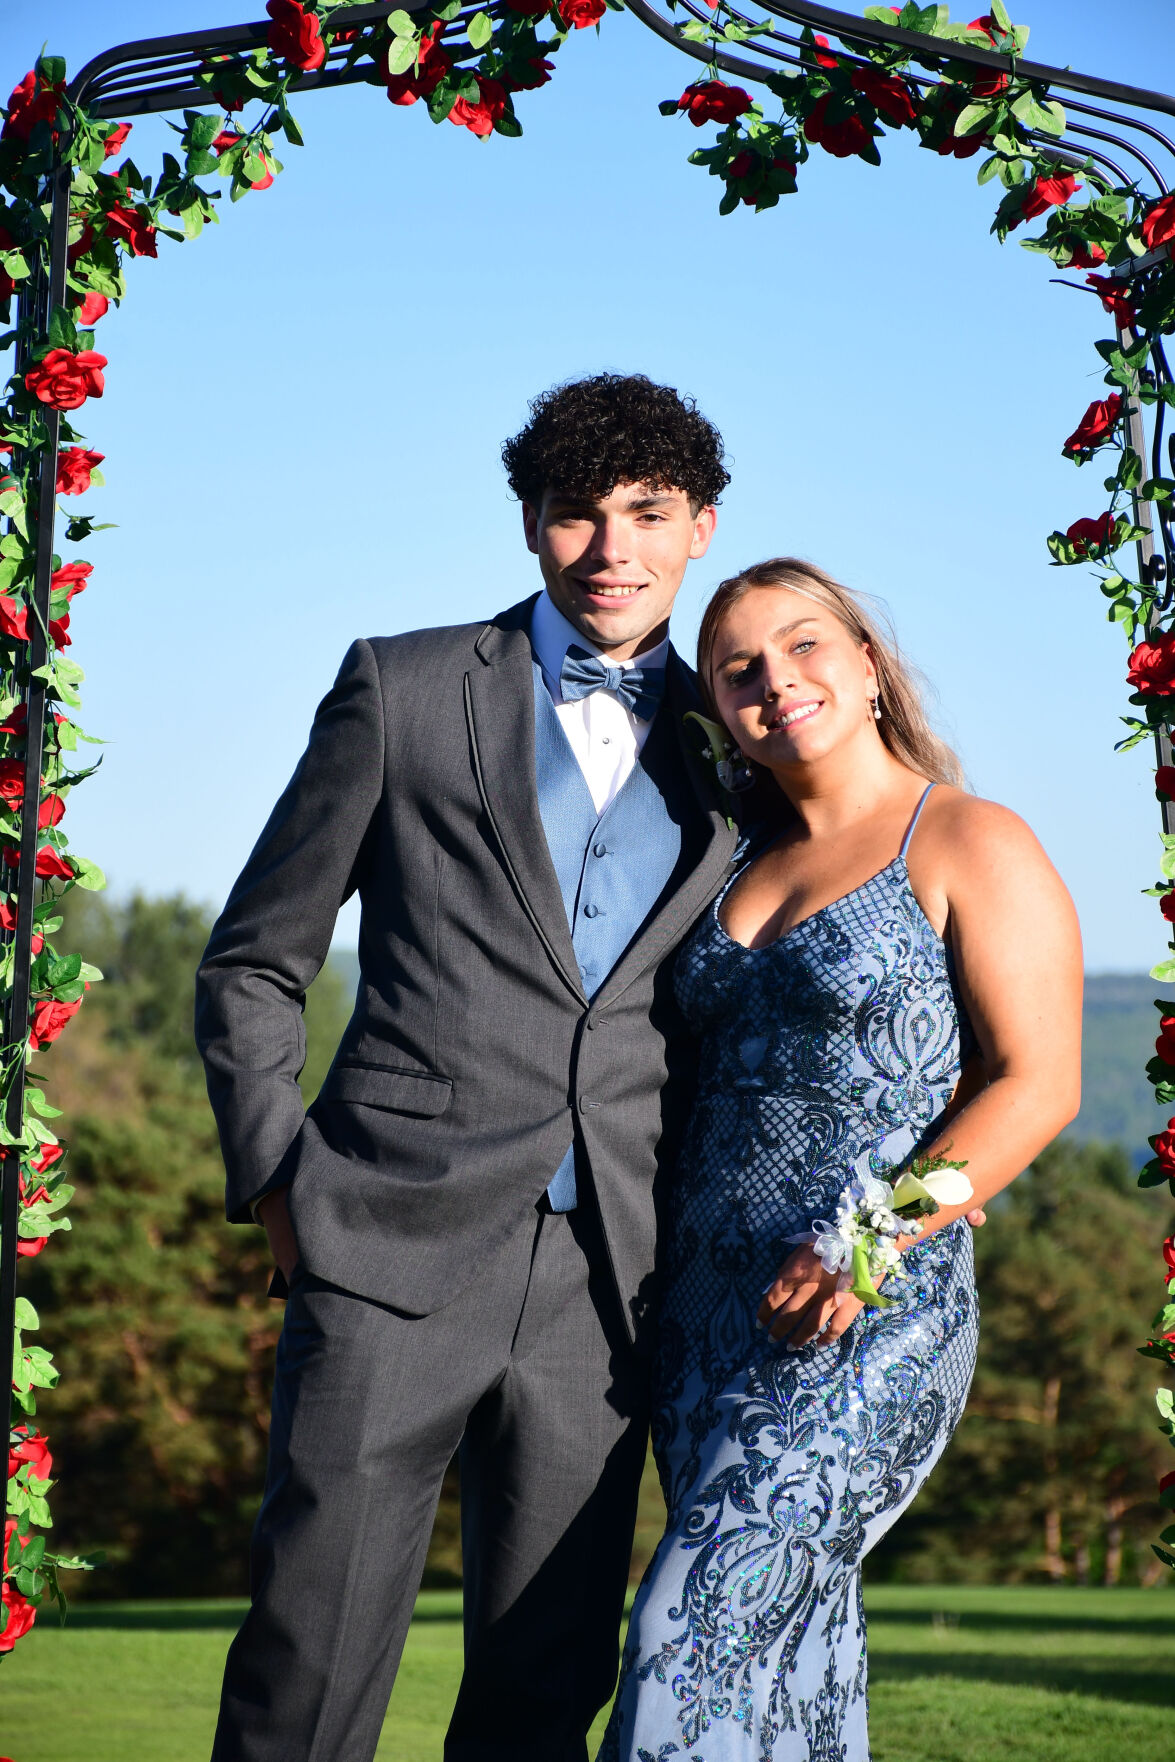 50+ Prom Poses To Copy For The Perfect Photos